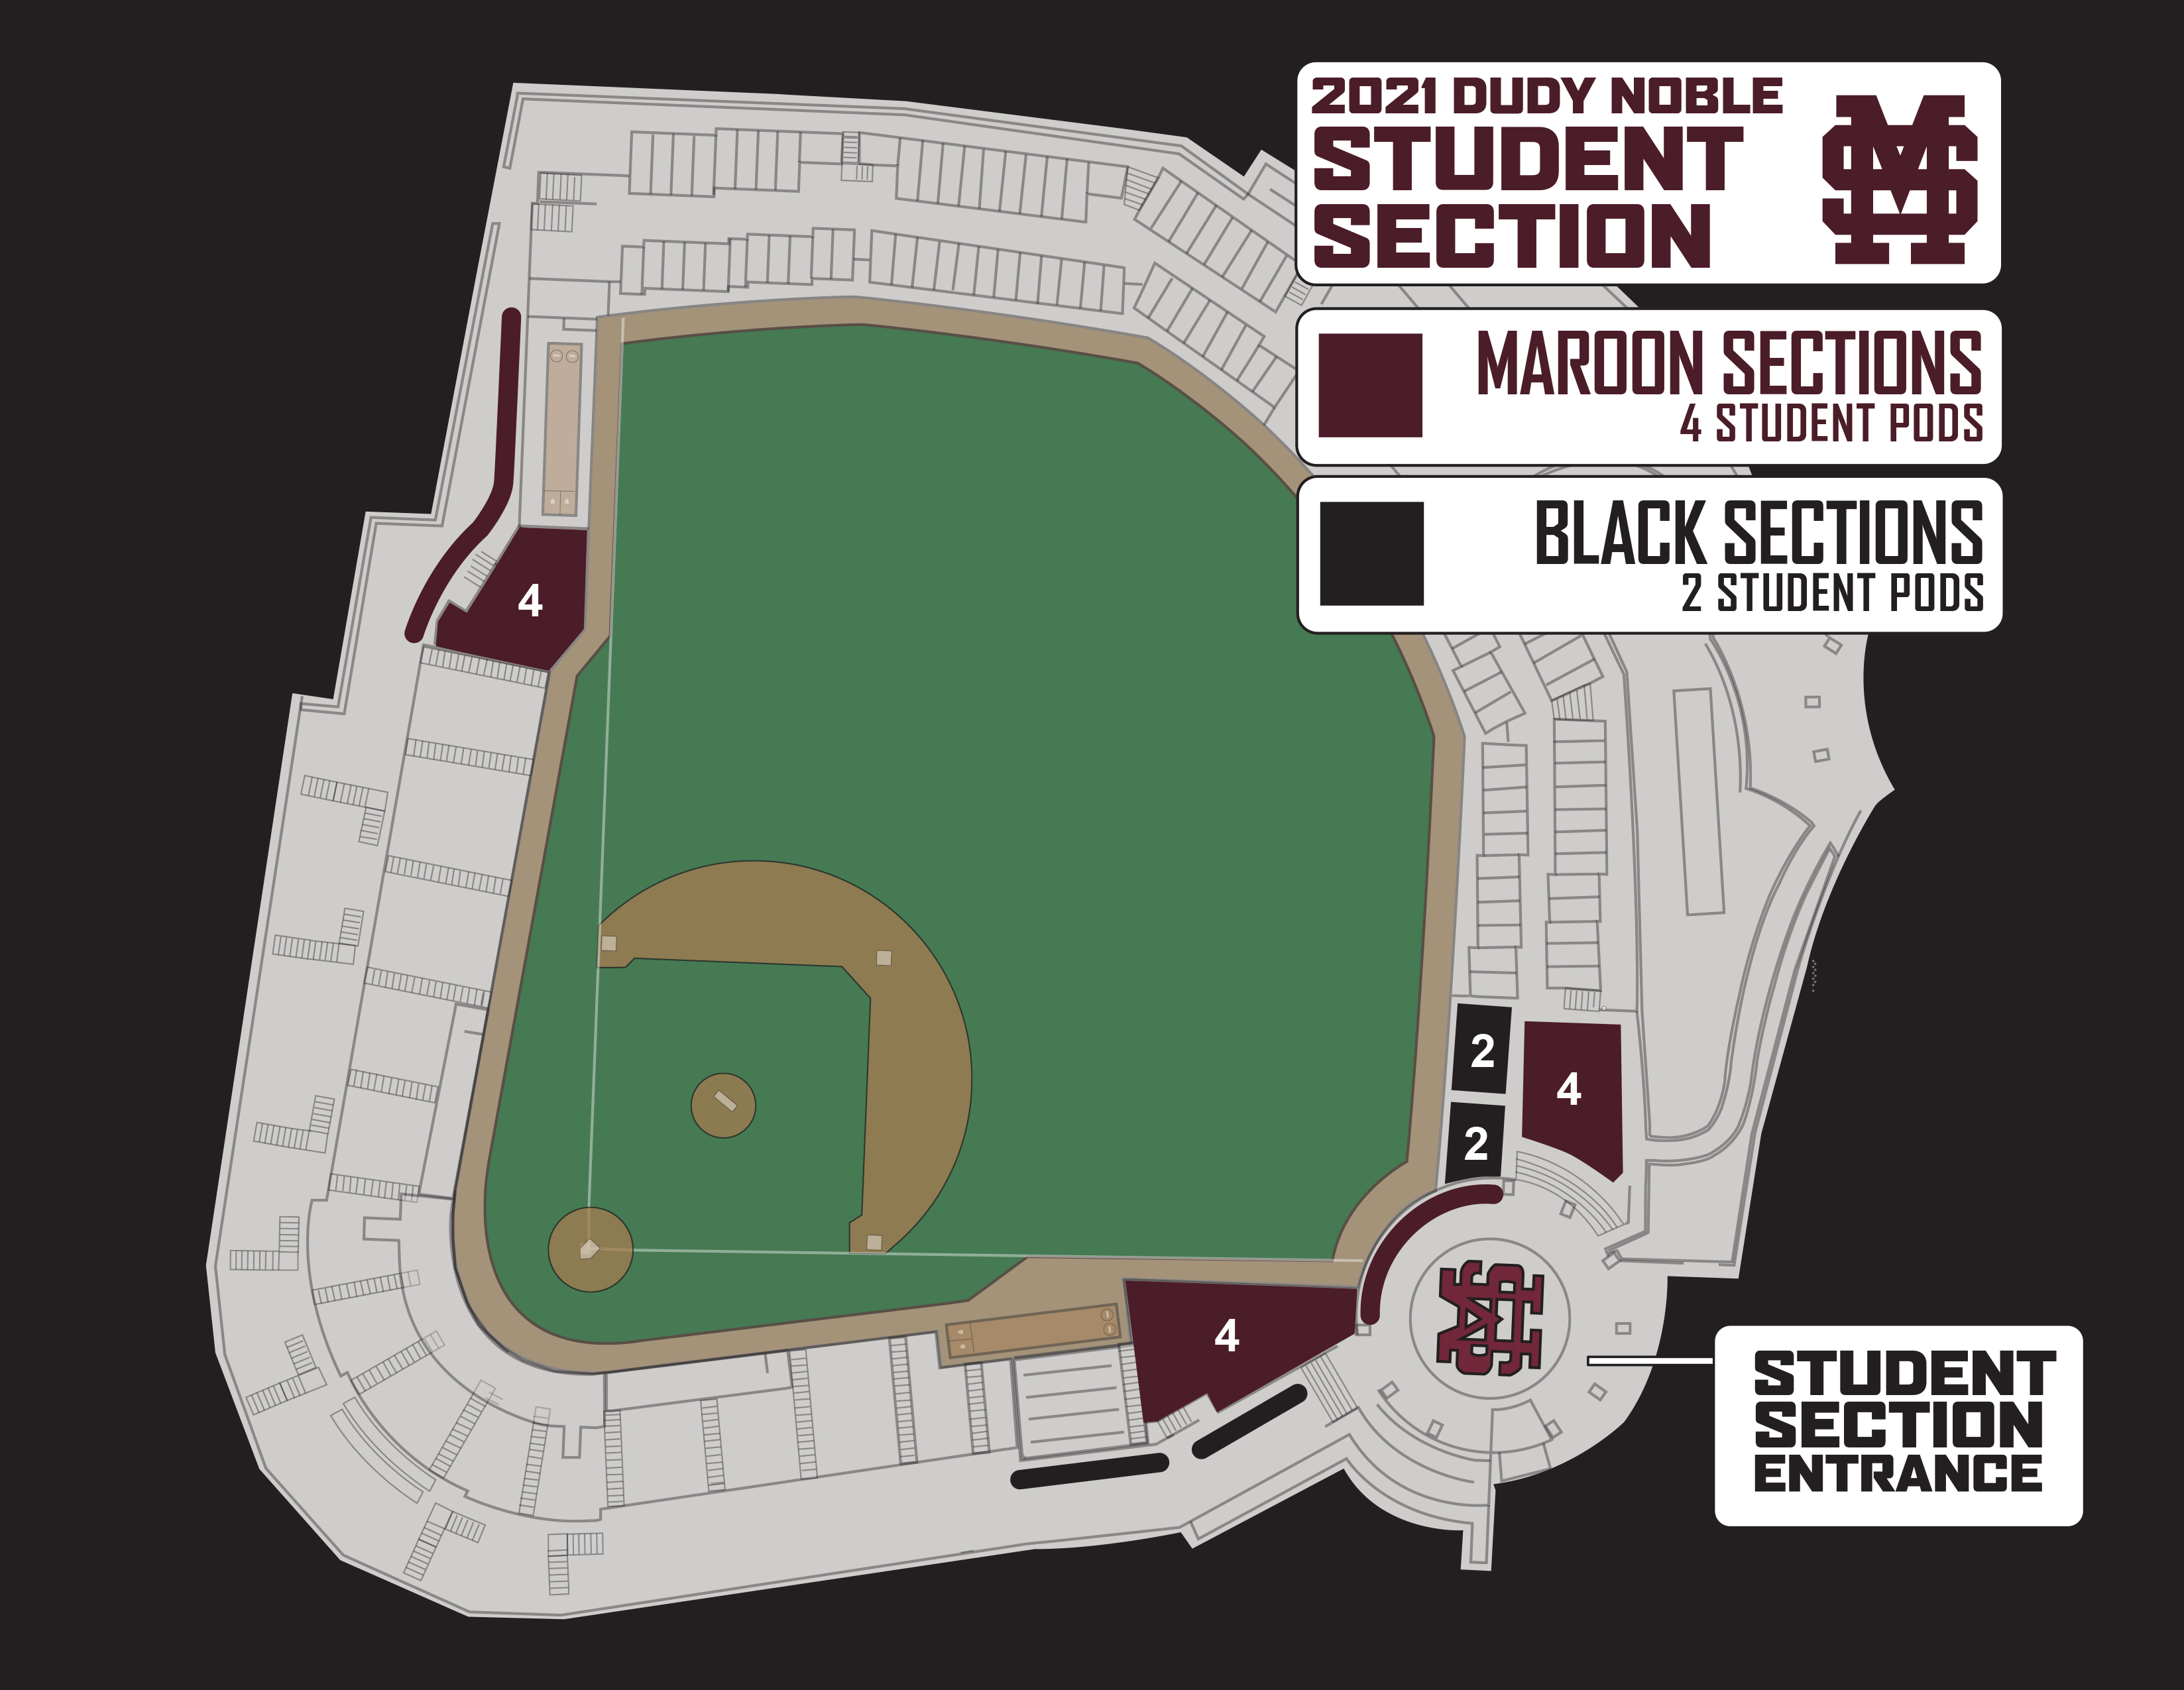 2021 Dudy Noble Field student section map